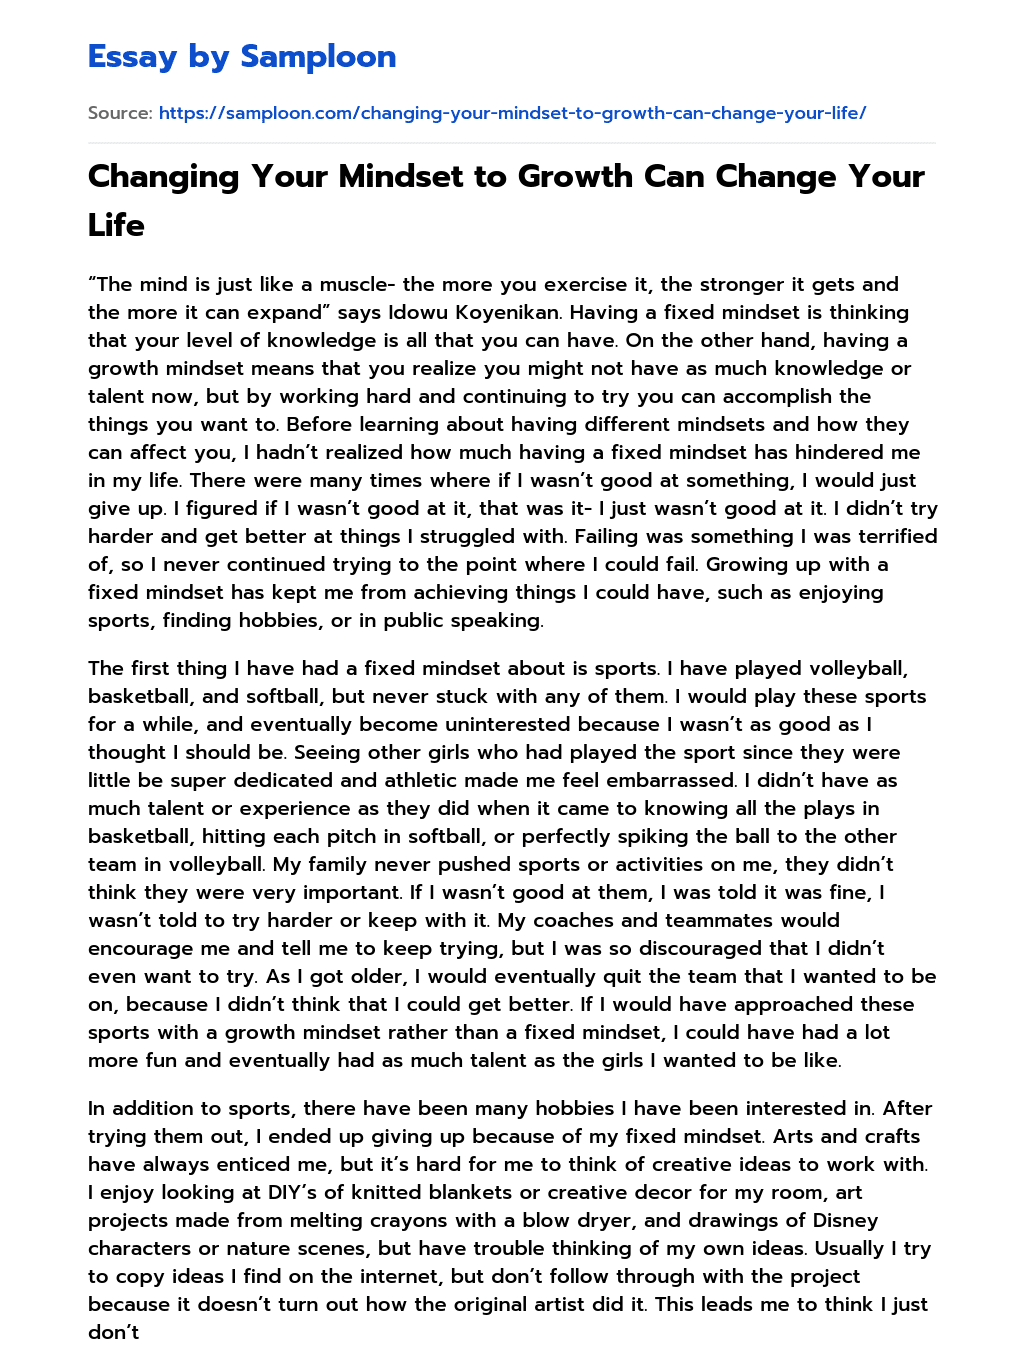 Changing Your Mindset to Growth Can Change Your Life essay